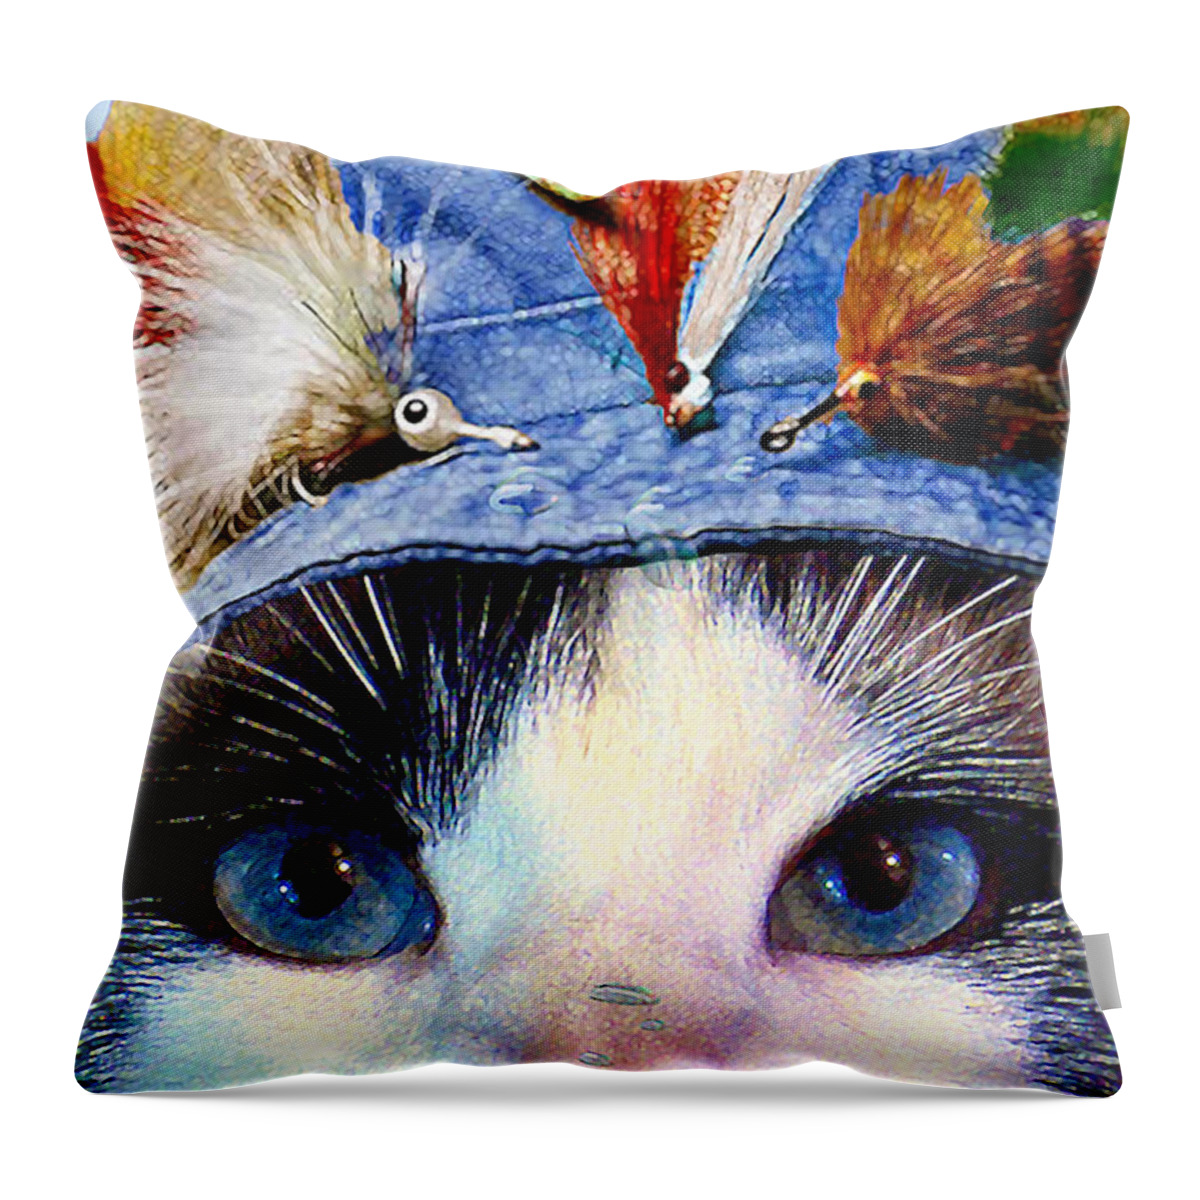 Cat Throw Pillow featuring the mixed media Fisher Cat by Michele Avanti